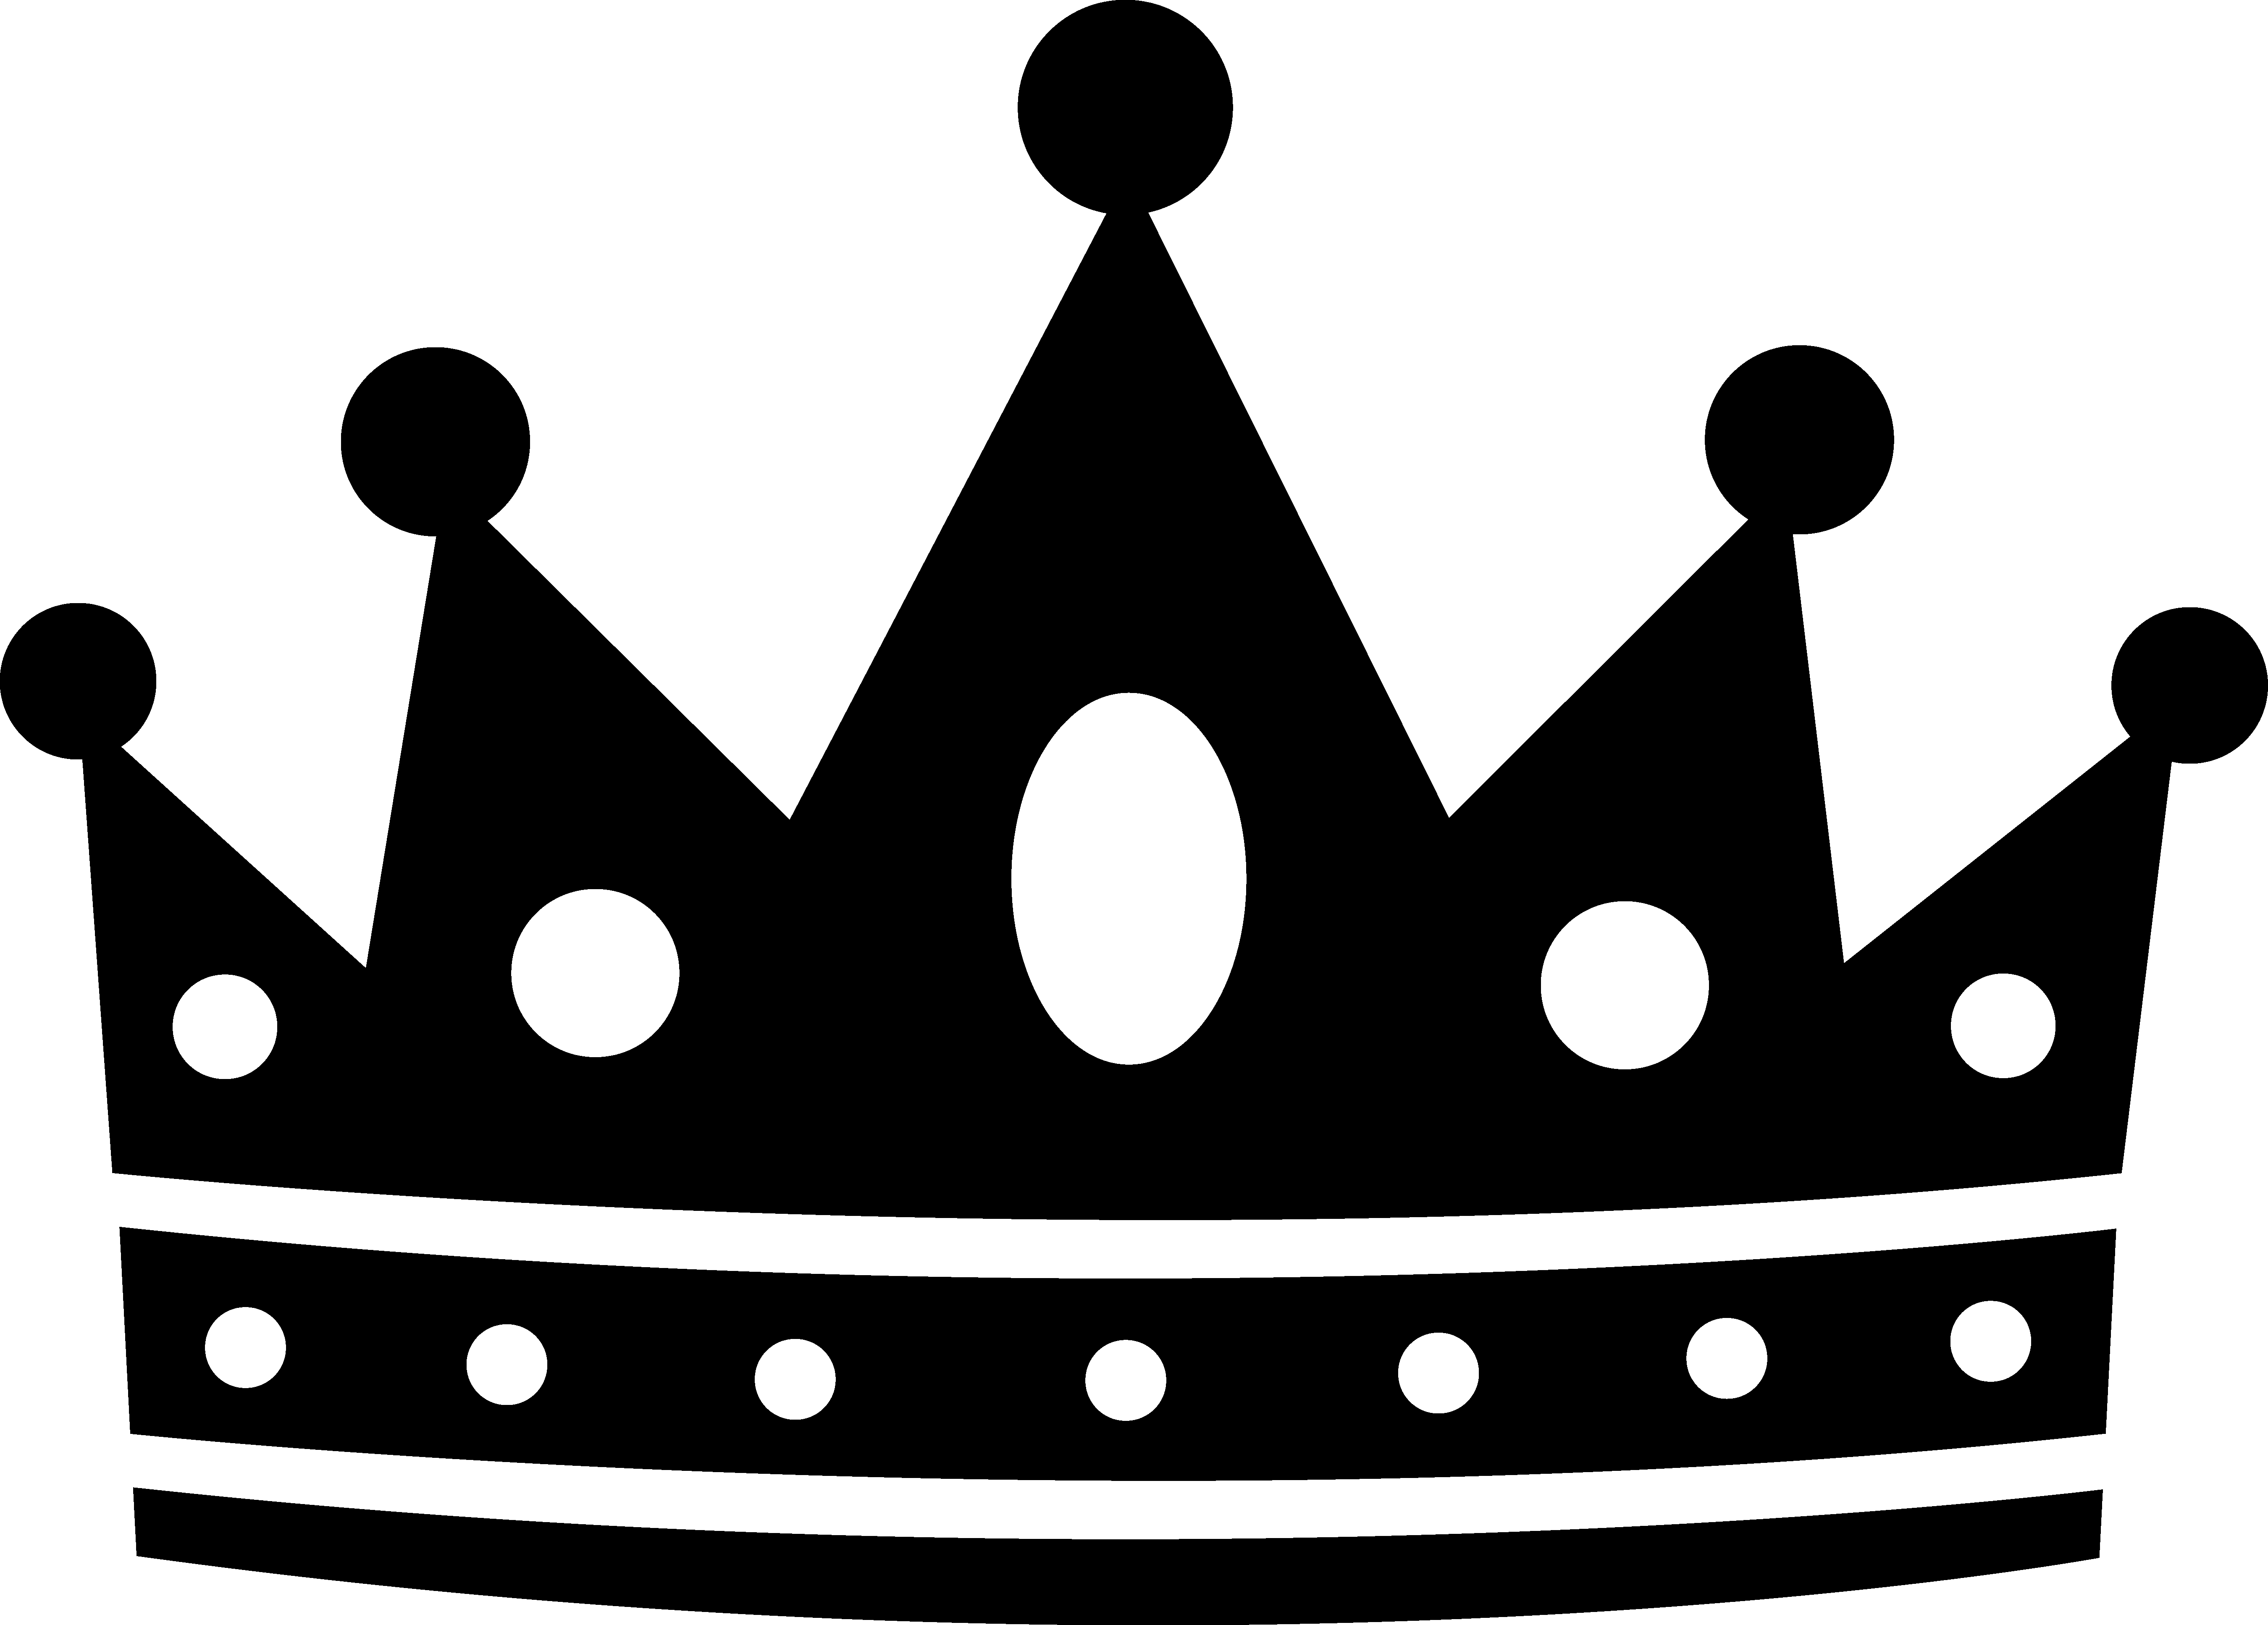 clipart crown black and white - photo #39